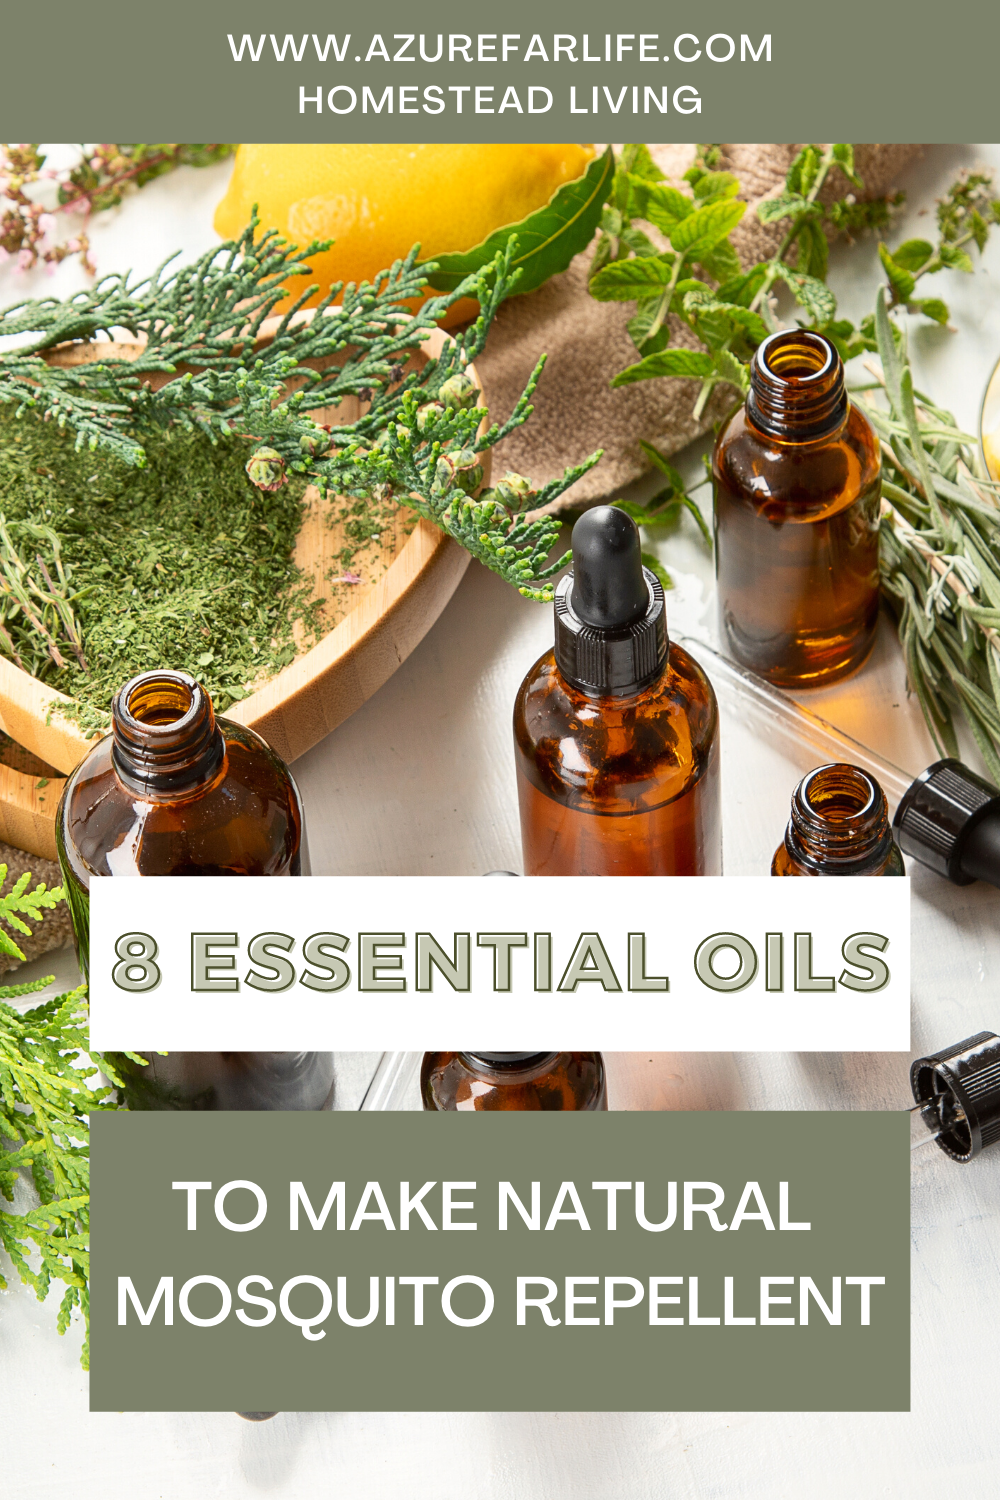 Why essential oils on the homestead can save you big $$